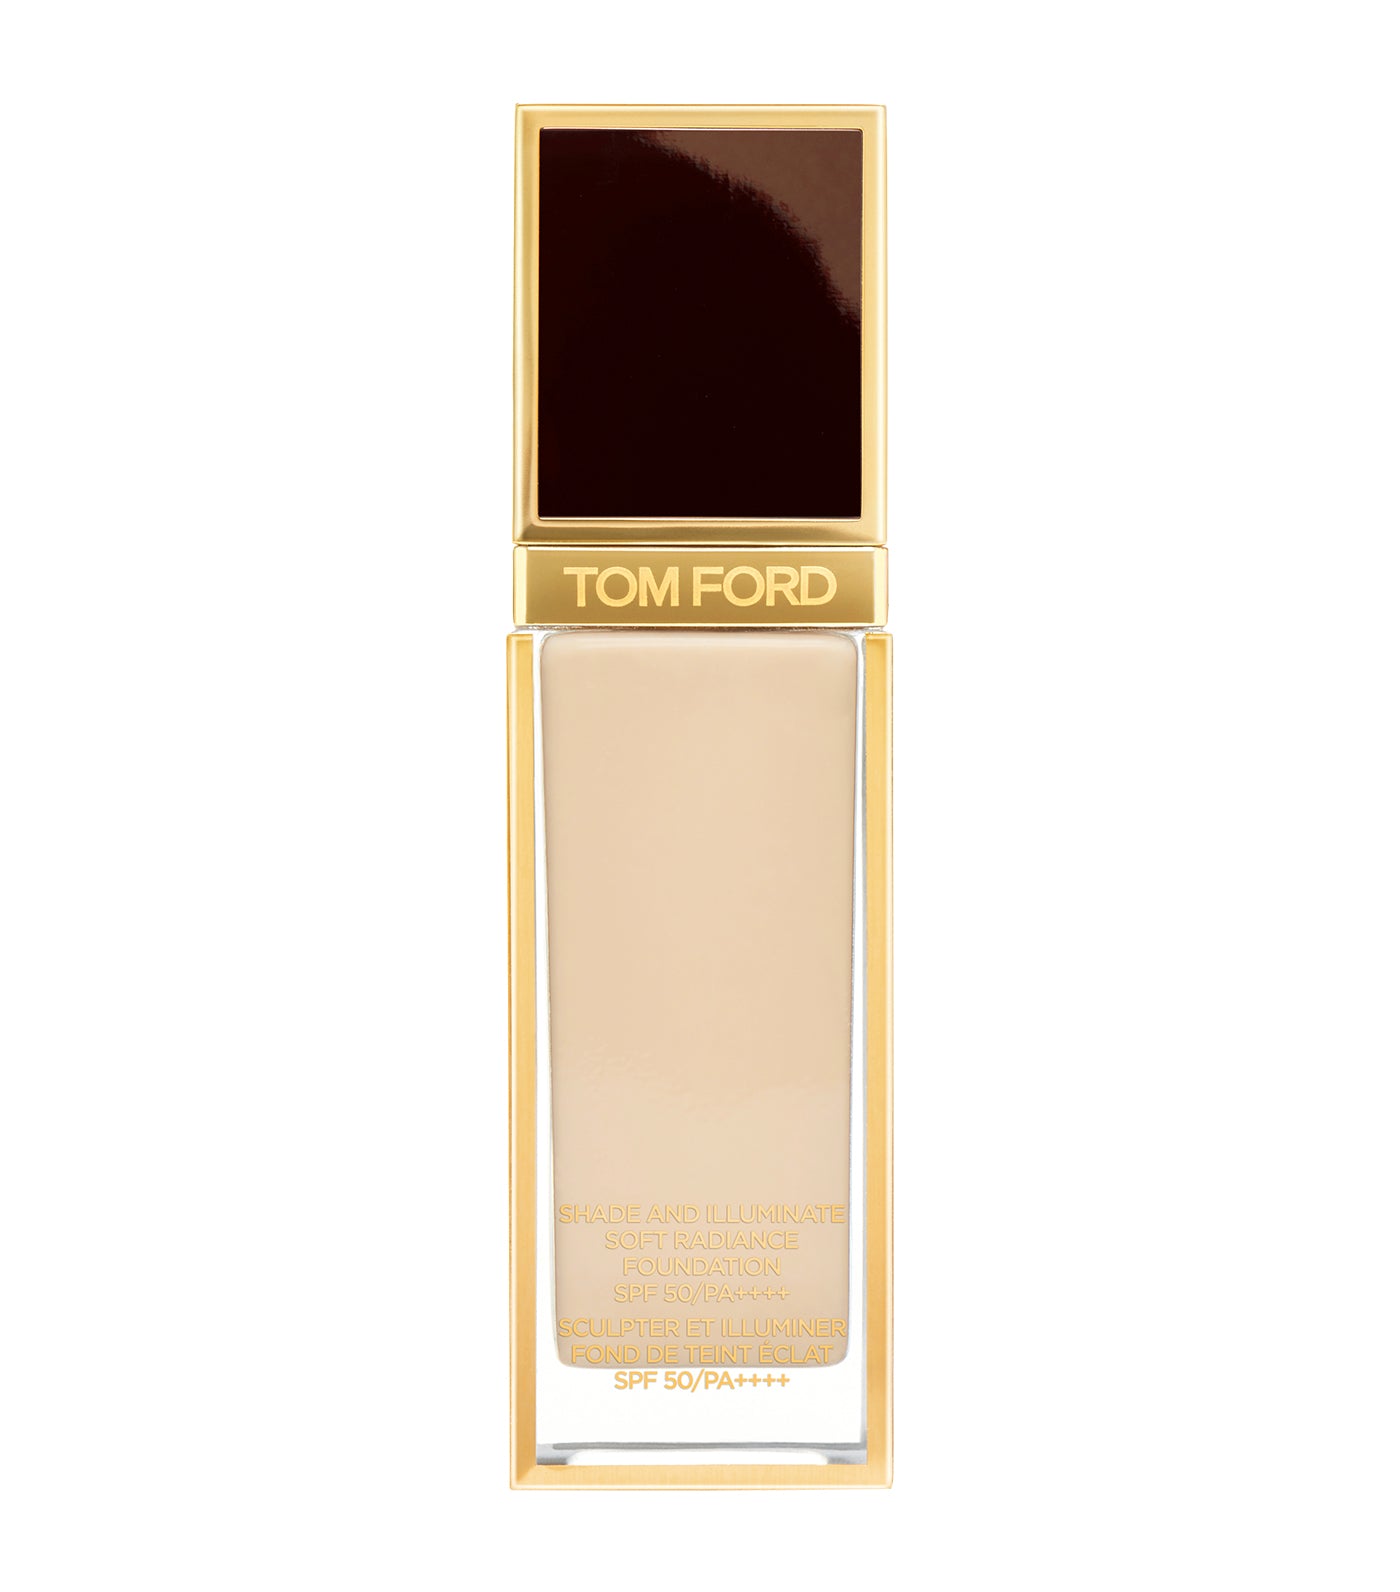 tom ford shade and illuminate soft radiance foundation spf 50/pa++++ linen